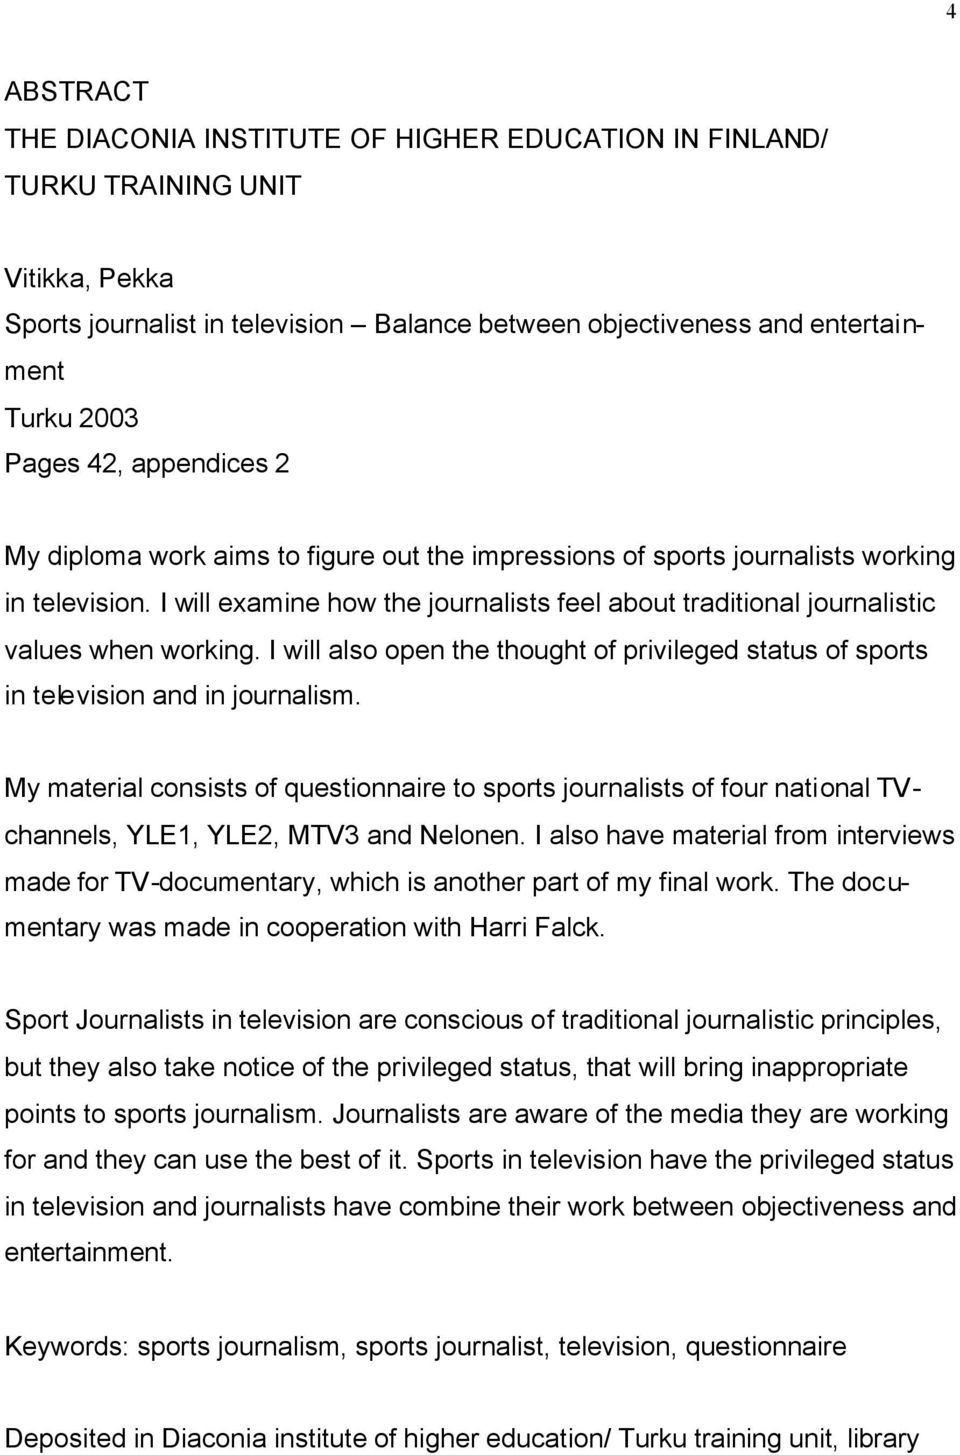 I will examine how the journalists feel about traditional journalistic values when working. I will also open the thought of privileged status of sports in television and in journalism.